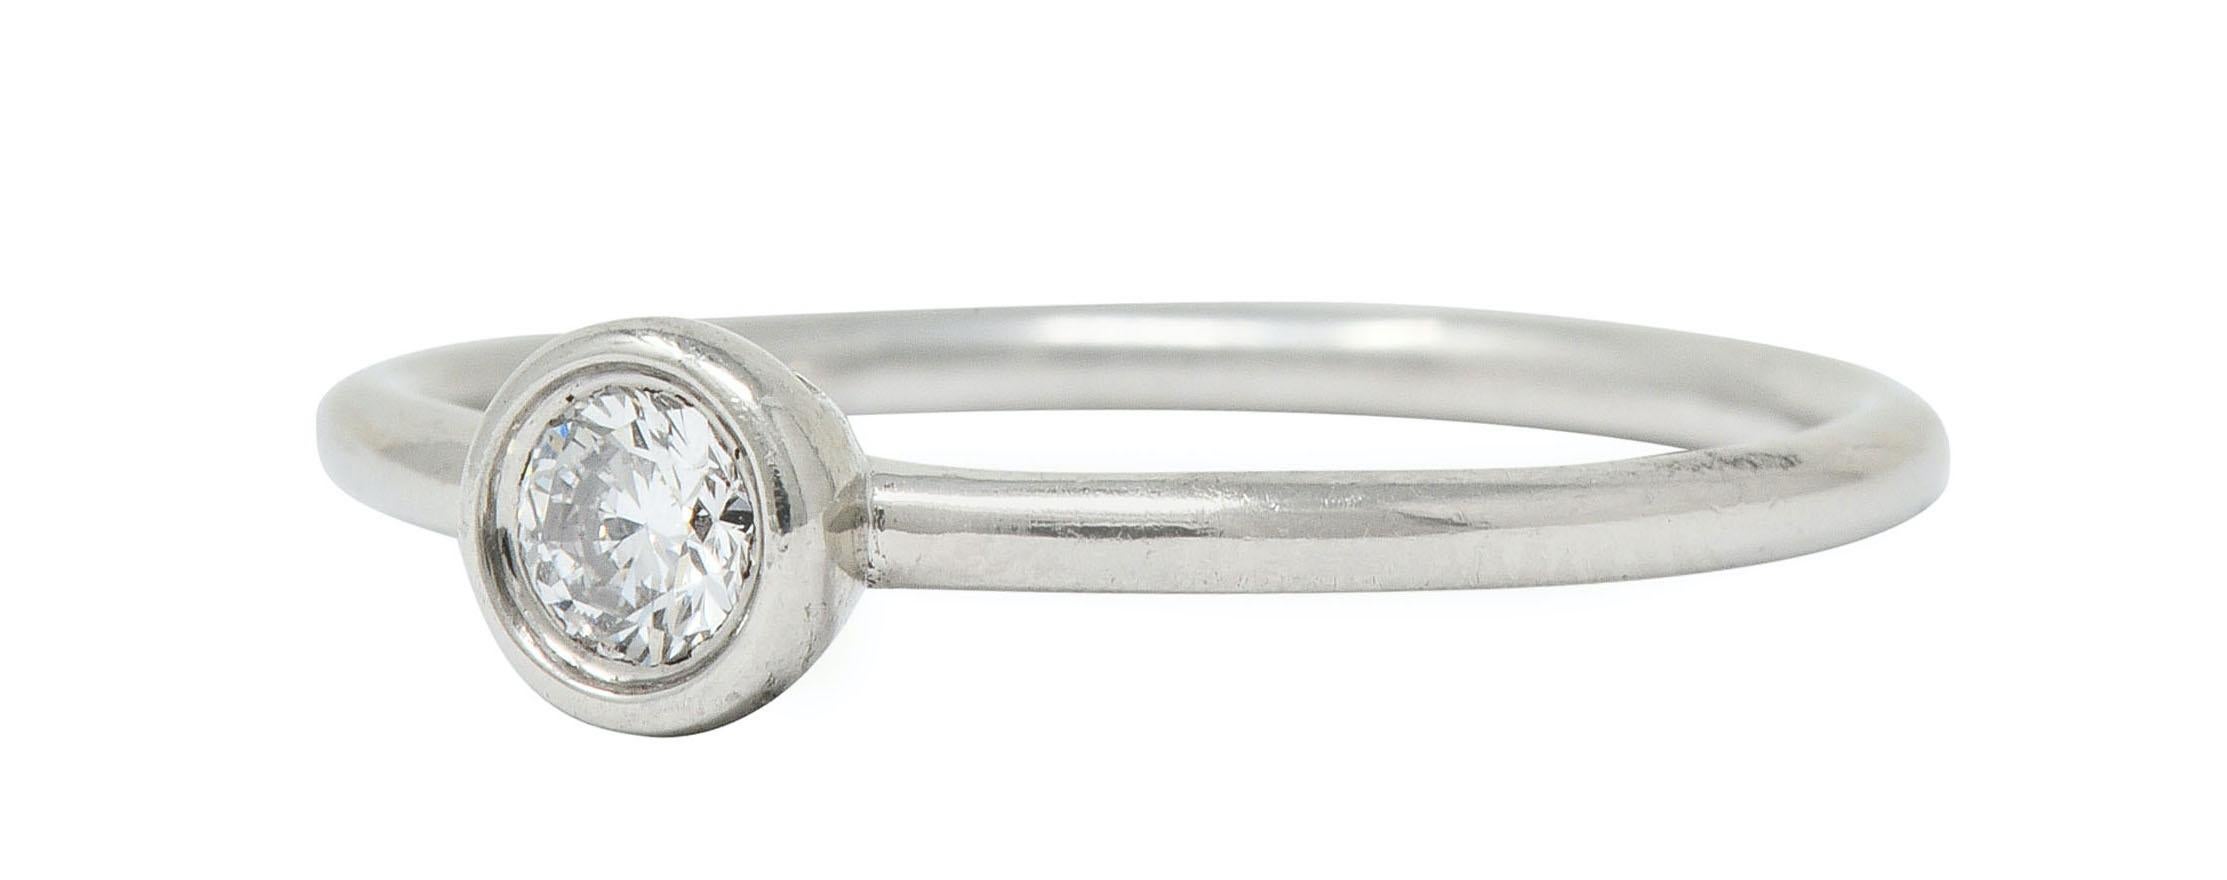 Tiffany & Co. Contemporary Diamond Platinum Bezet Solitaire Ring In Excellent Condition For Sale In Philadelphia, PA